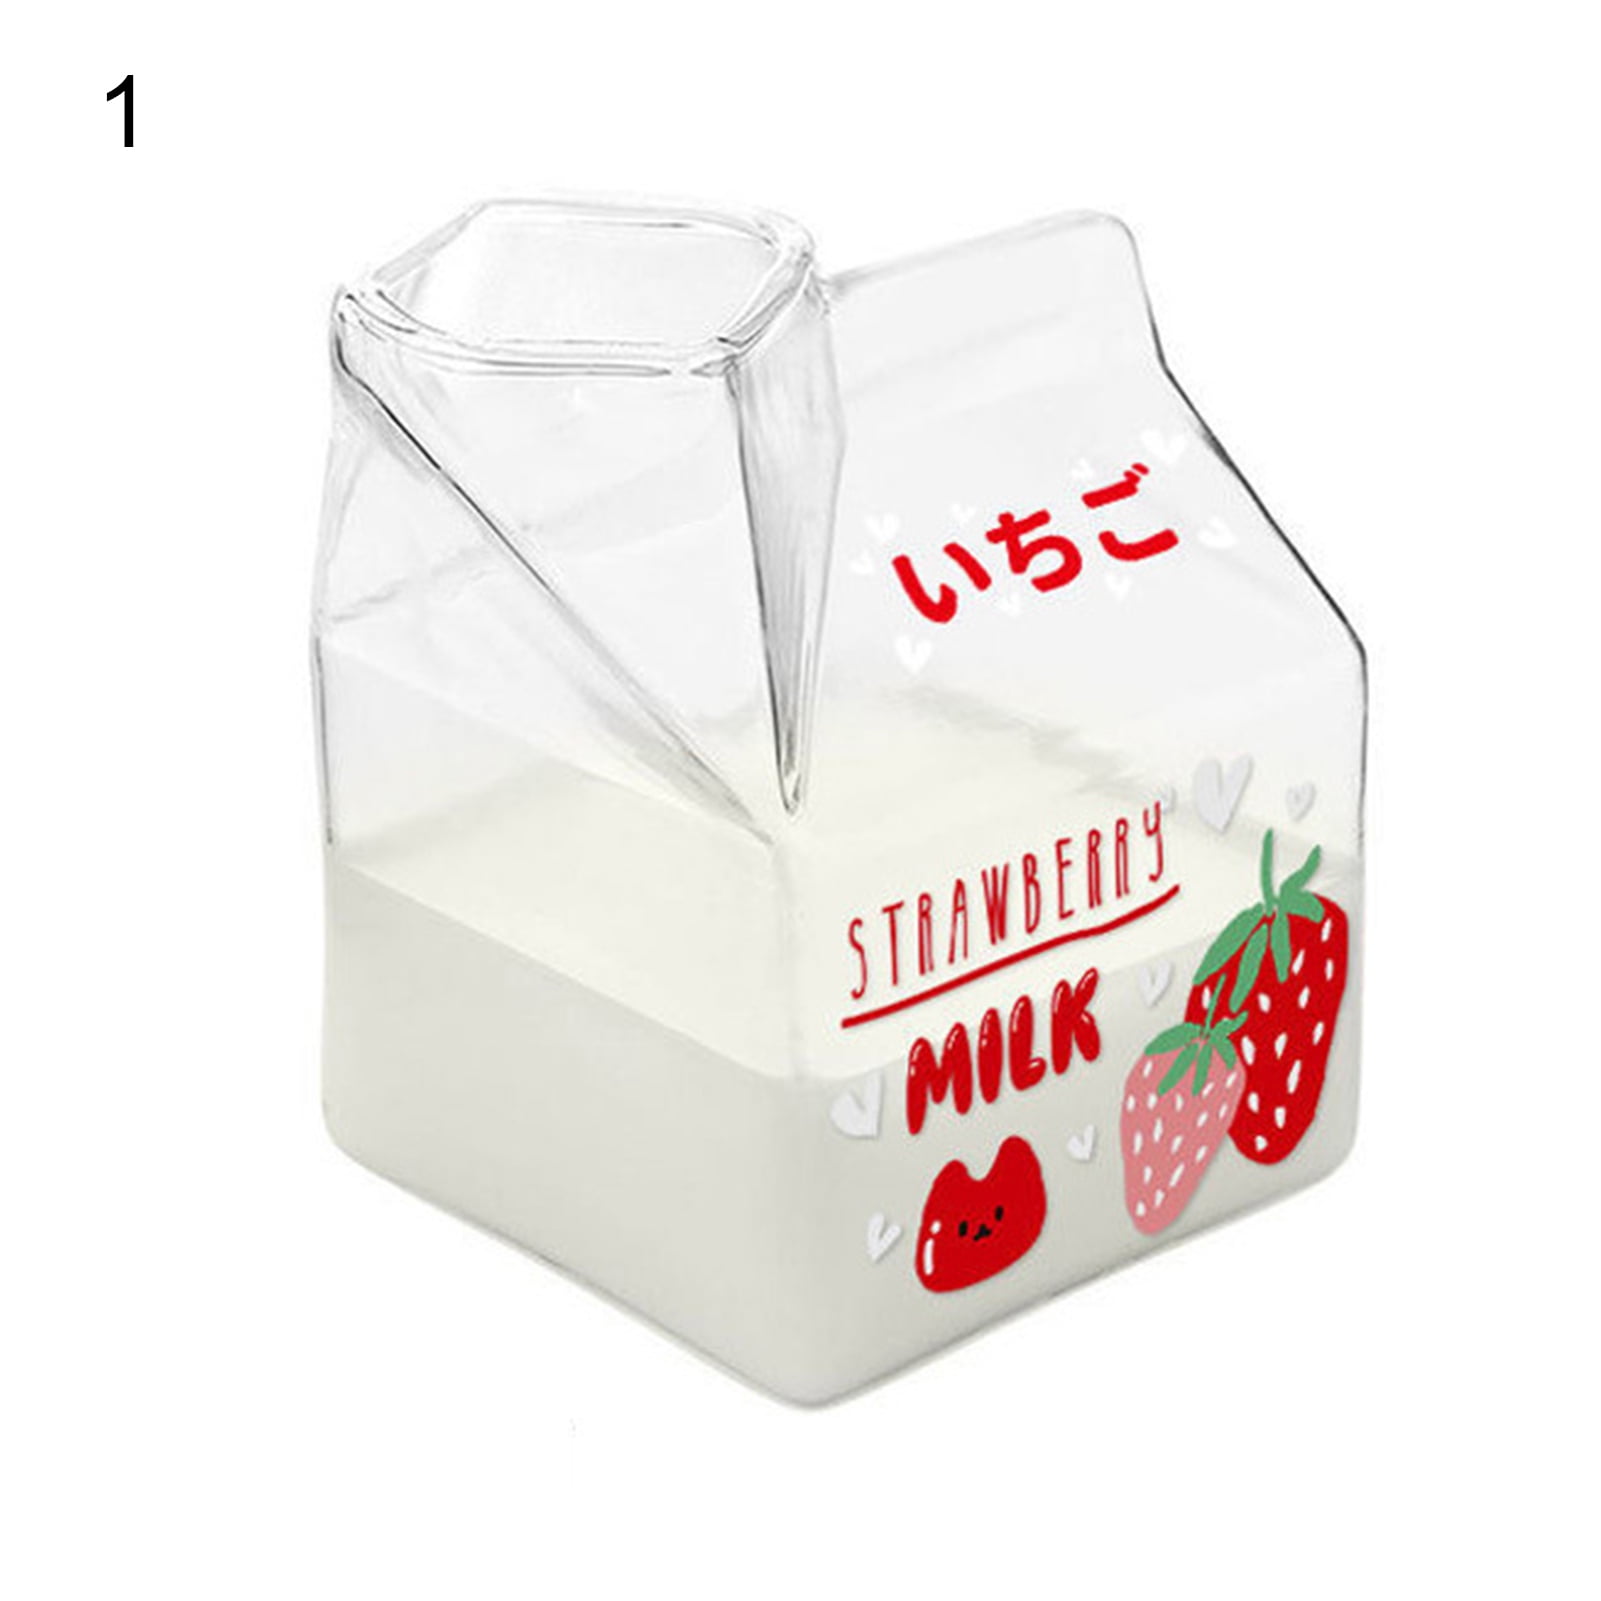 NXACETN 400ML Milk Cup Square Shape Lovely Milk carton Cup Heat Resistant Milk Glass Cup Fruit Print Water Cup for Breakfast 